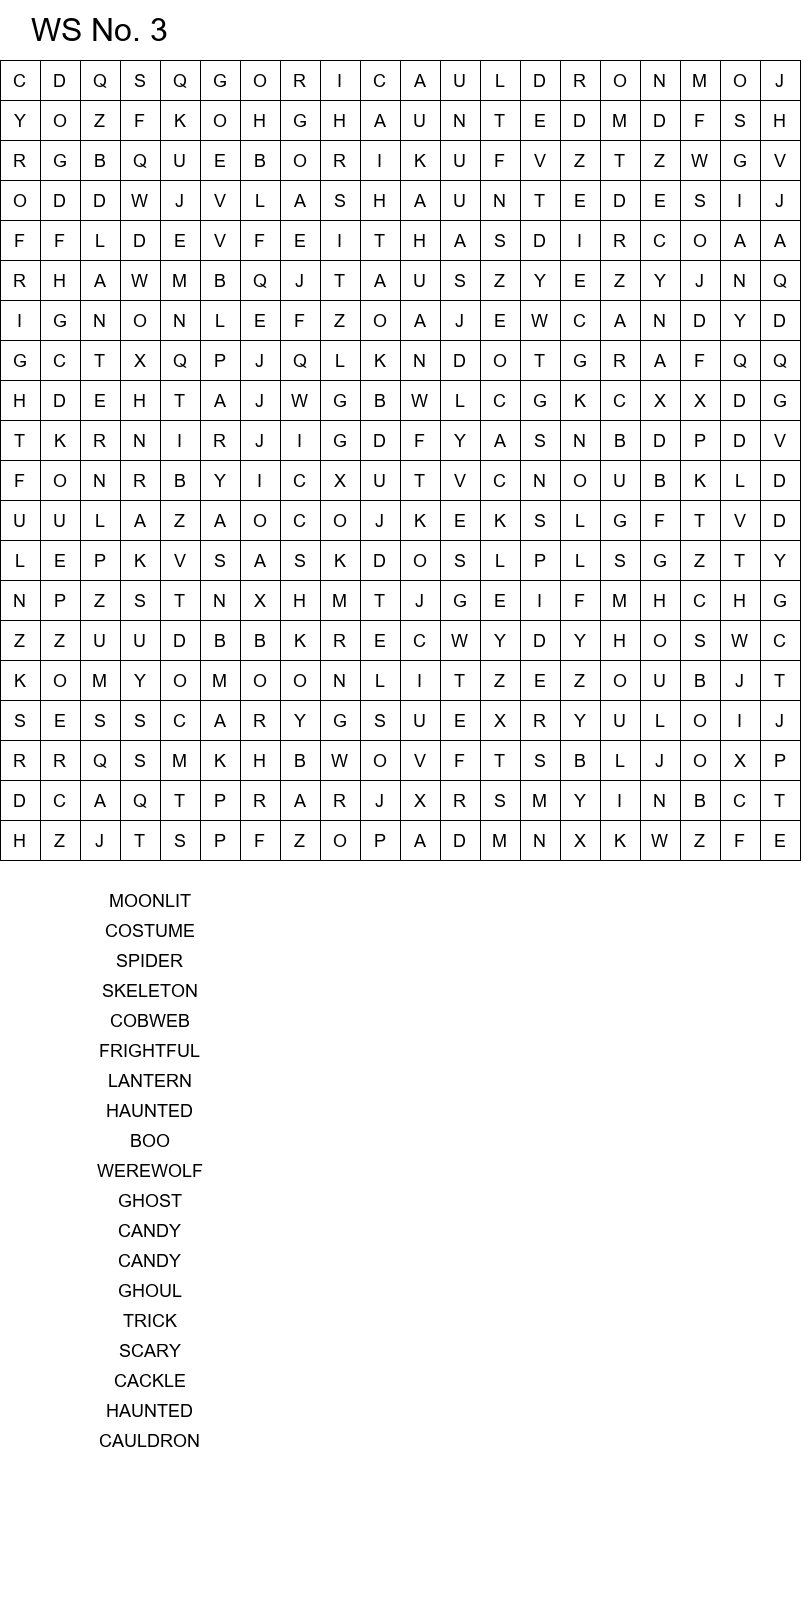 Free online Halloween word search puzzles size 20x20 No 3